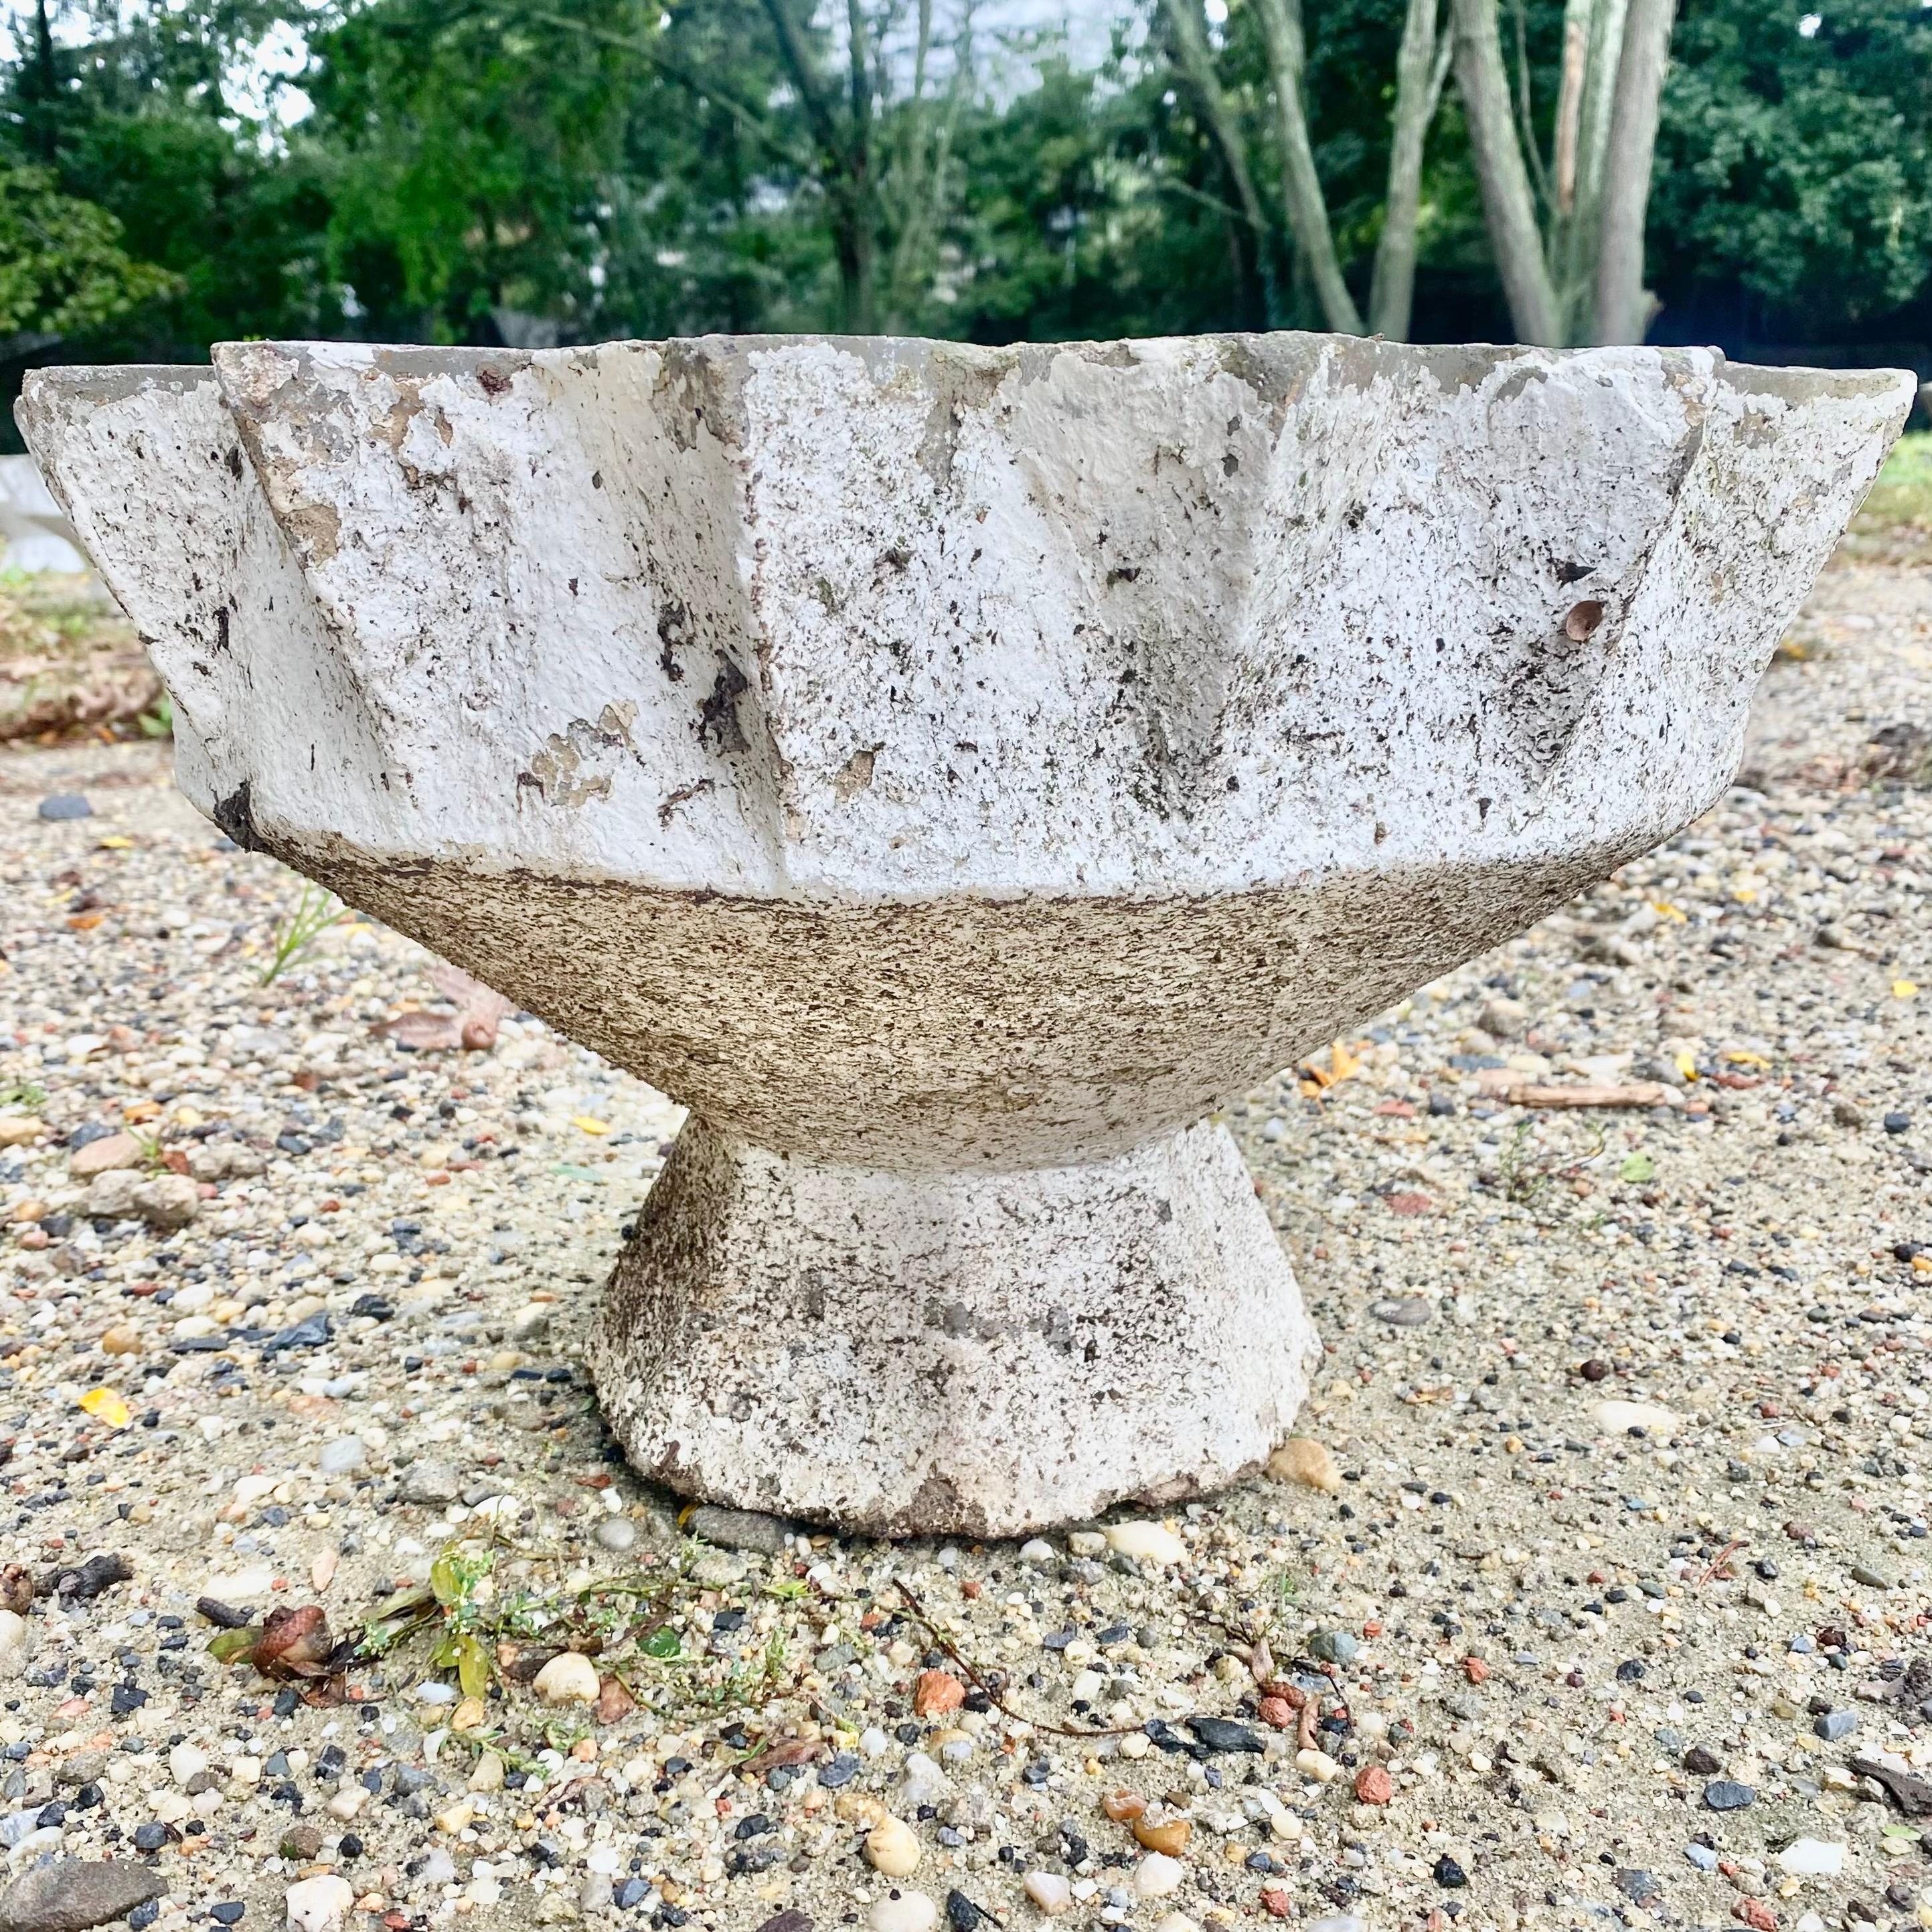 Unique concrete planter by Swiss architect Willy Guhl. Planter in the shape of a chalice. A variety of patina Great vintage condition. 3 available as shown in this listing. Priced individually. Description below matching image numbers to planters.